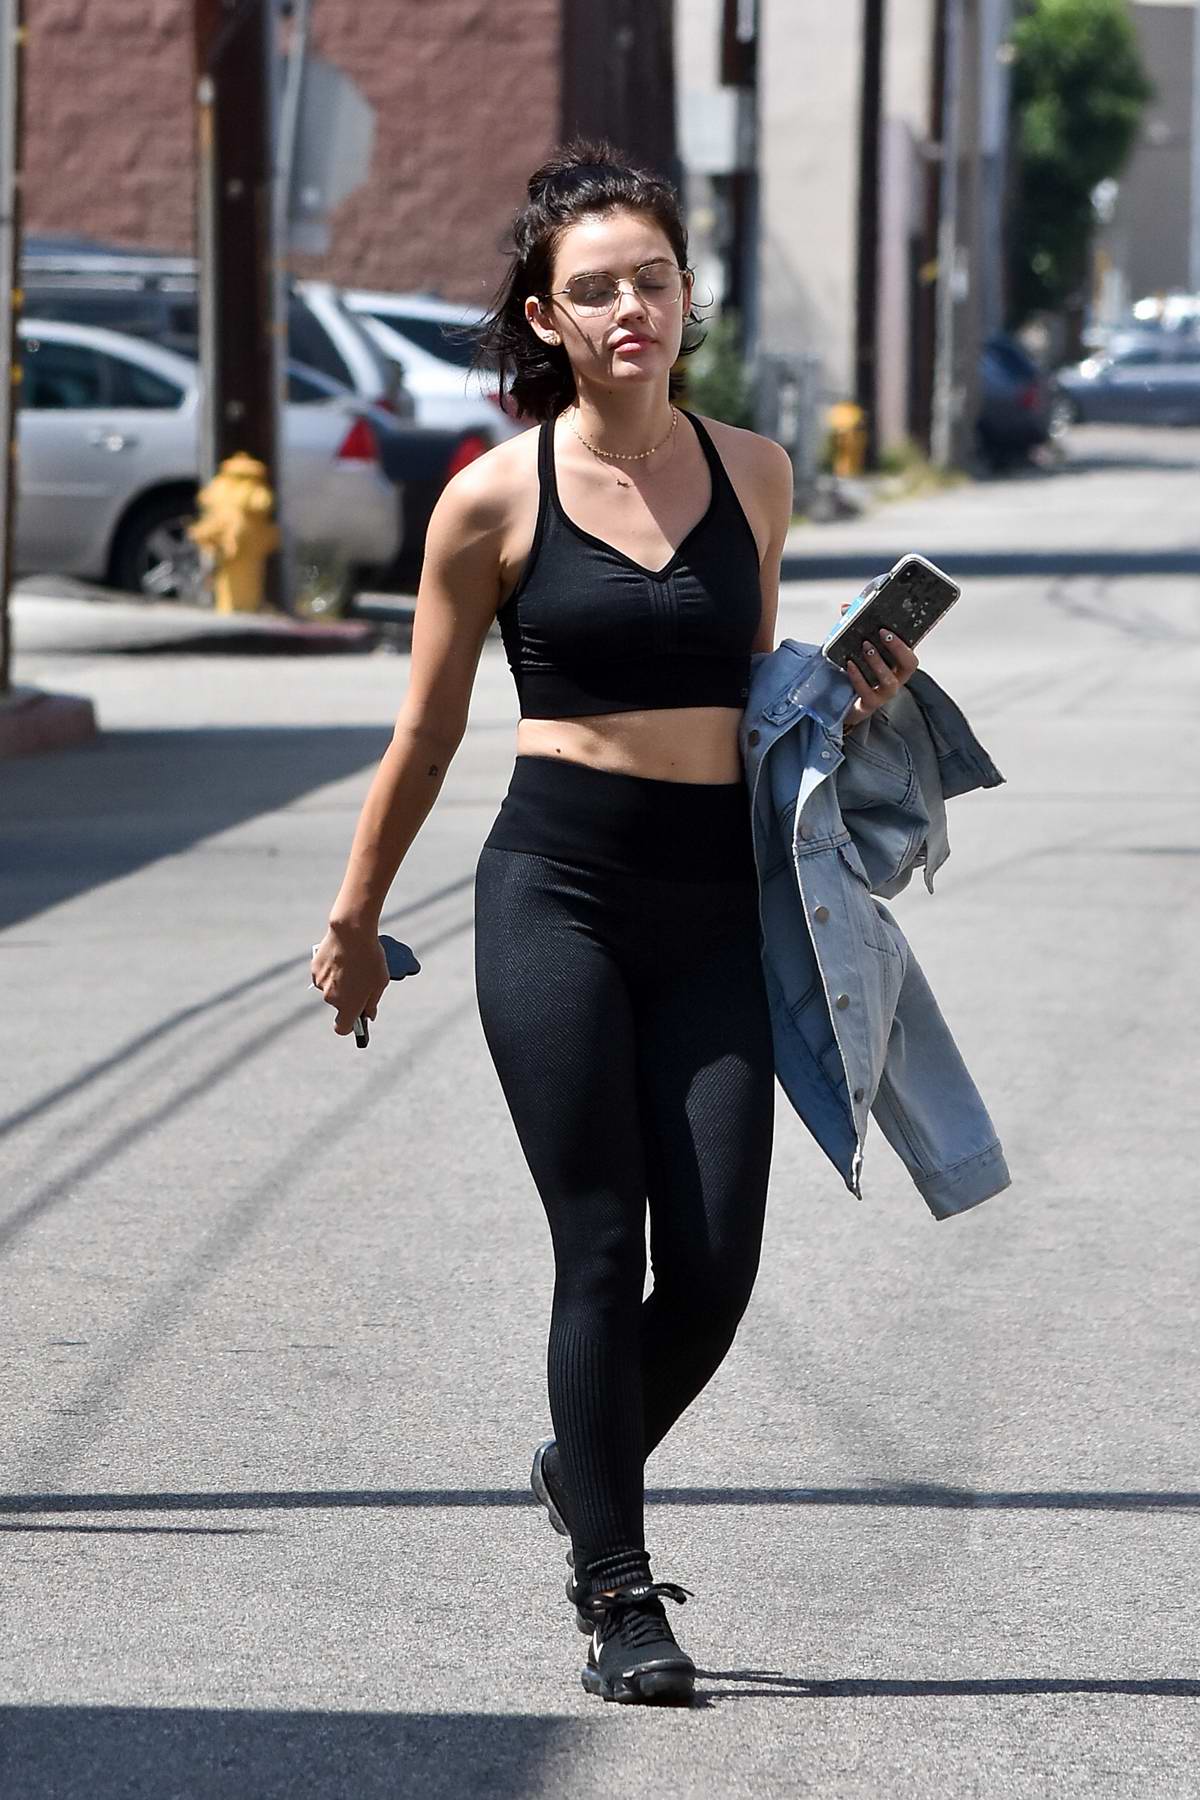 Lucy Hale heads out in a black sports bra and leggings after a workout  session at